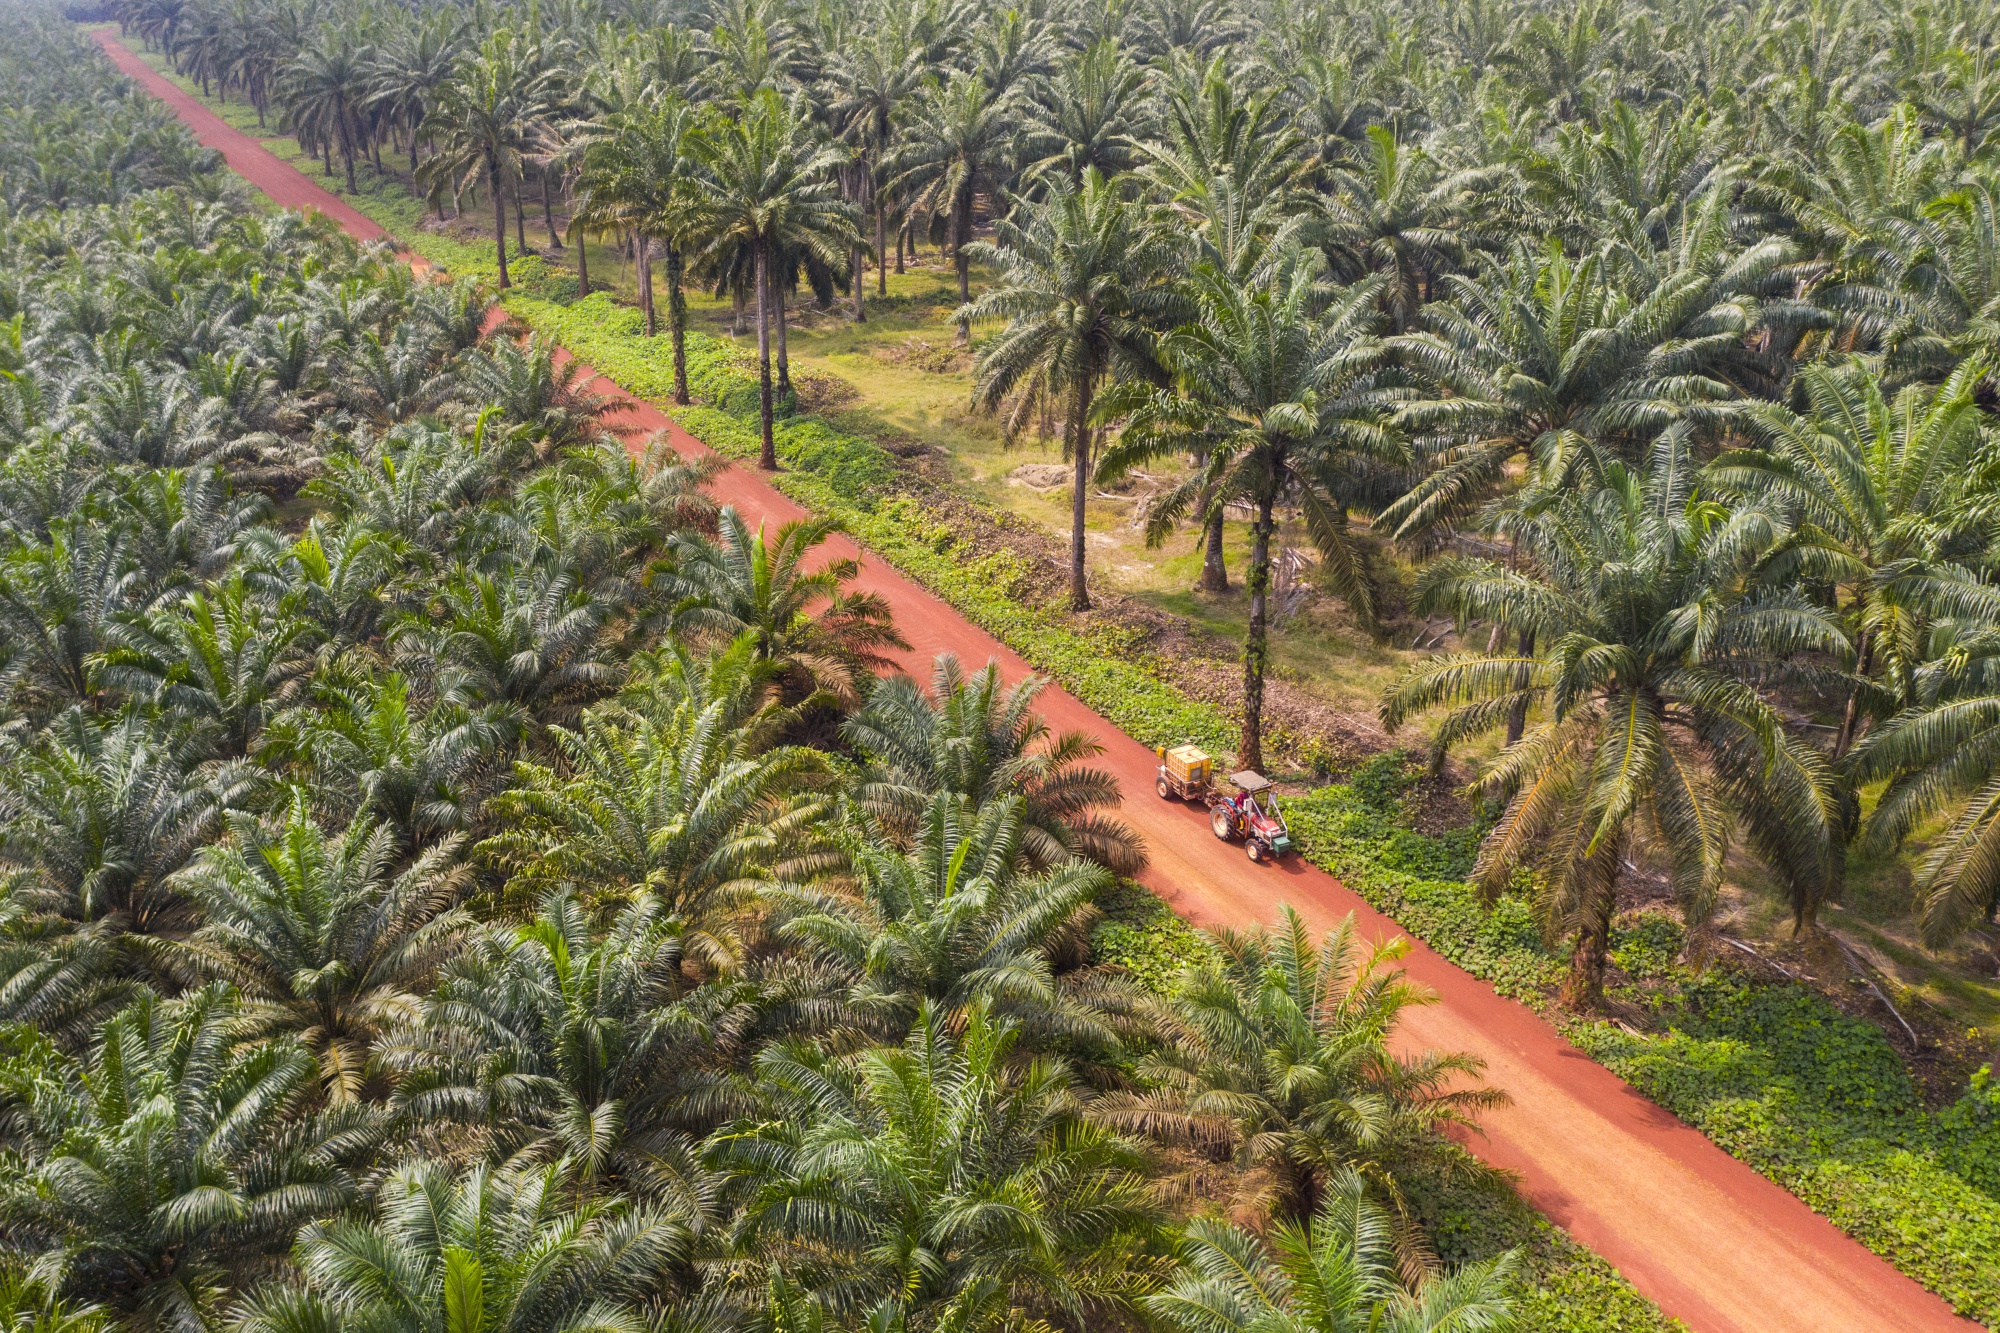 A tractor travels along a track at a palm plantation in Malaysia.